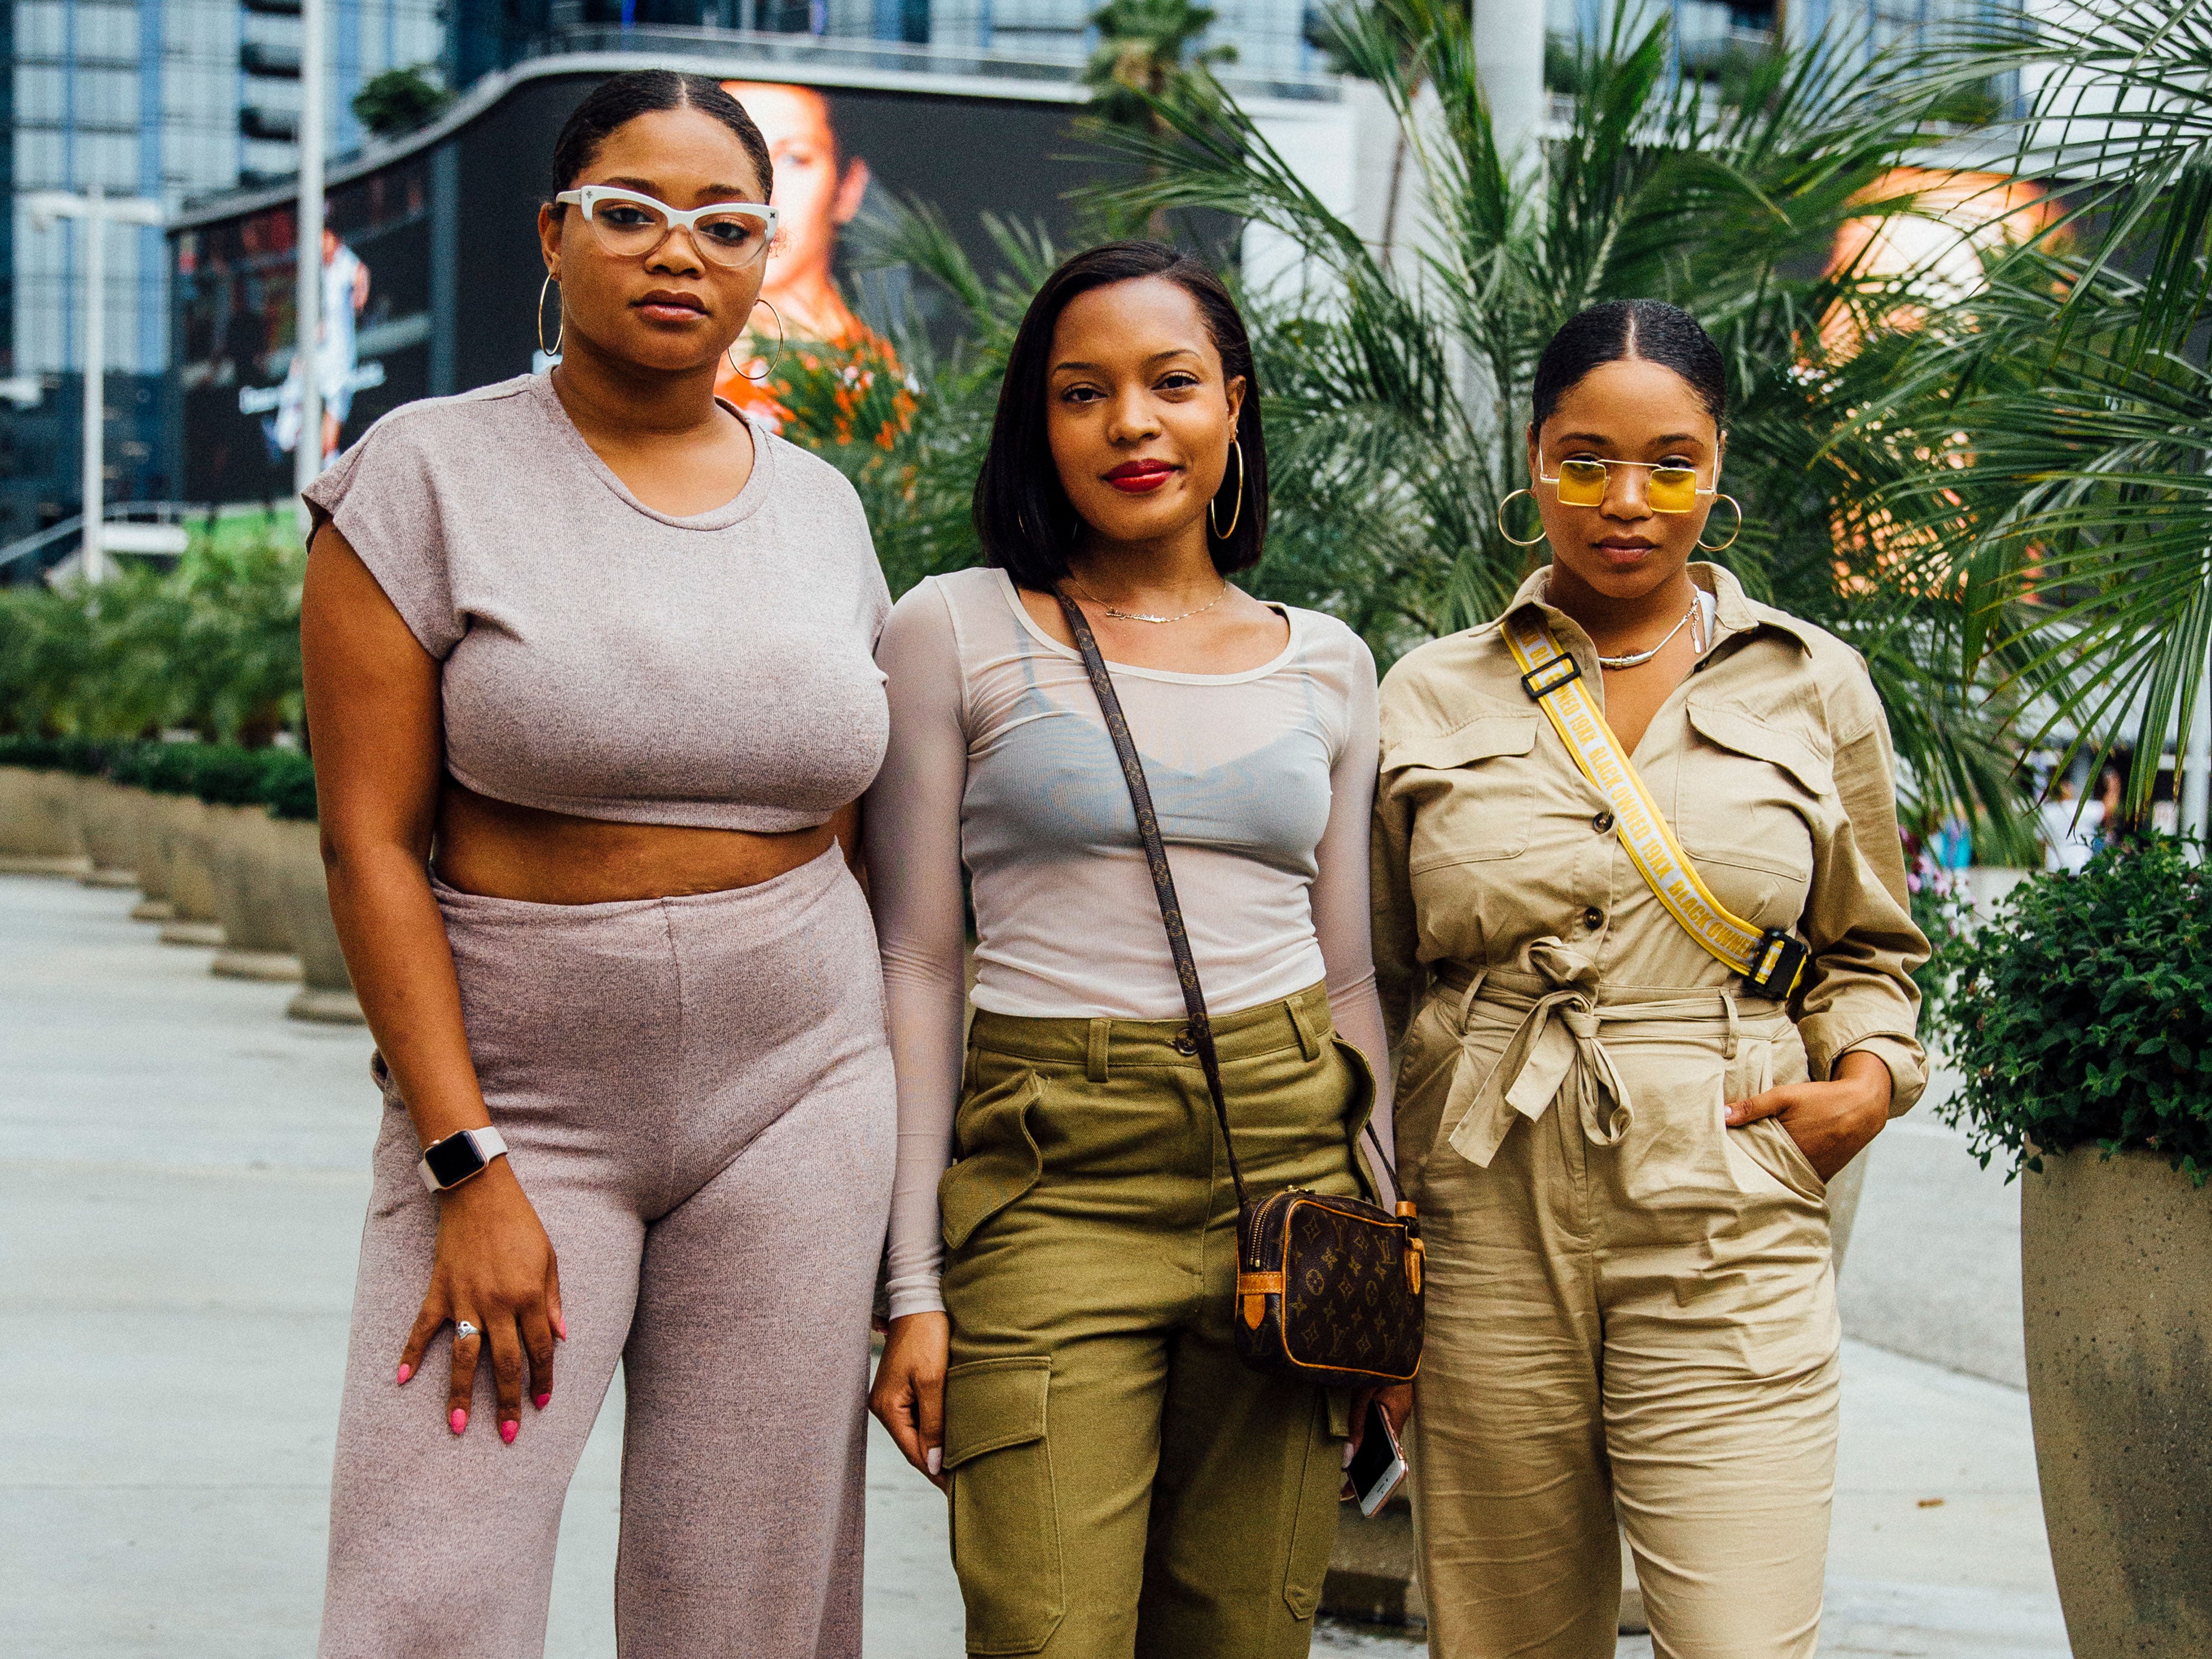 The Best Street Style During BET Weekend